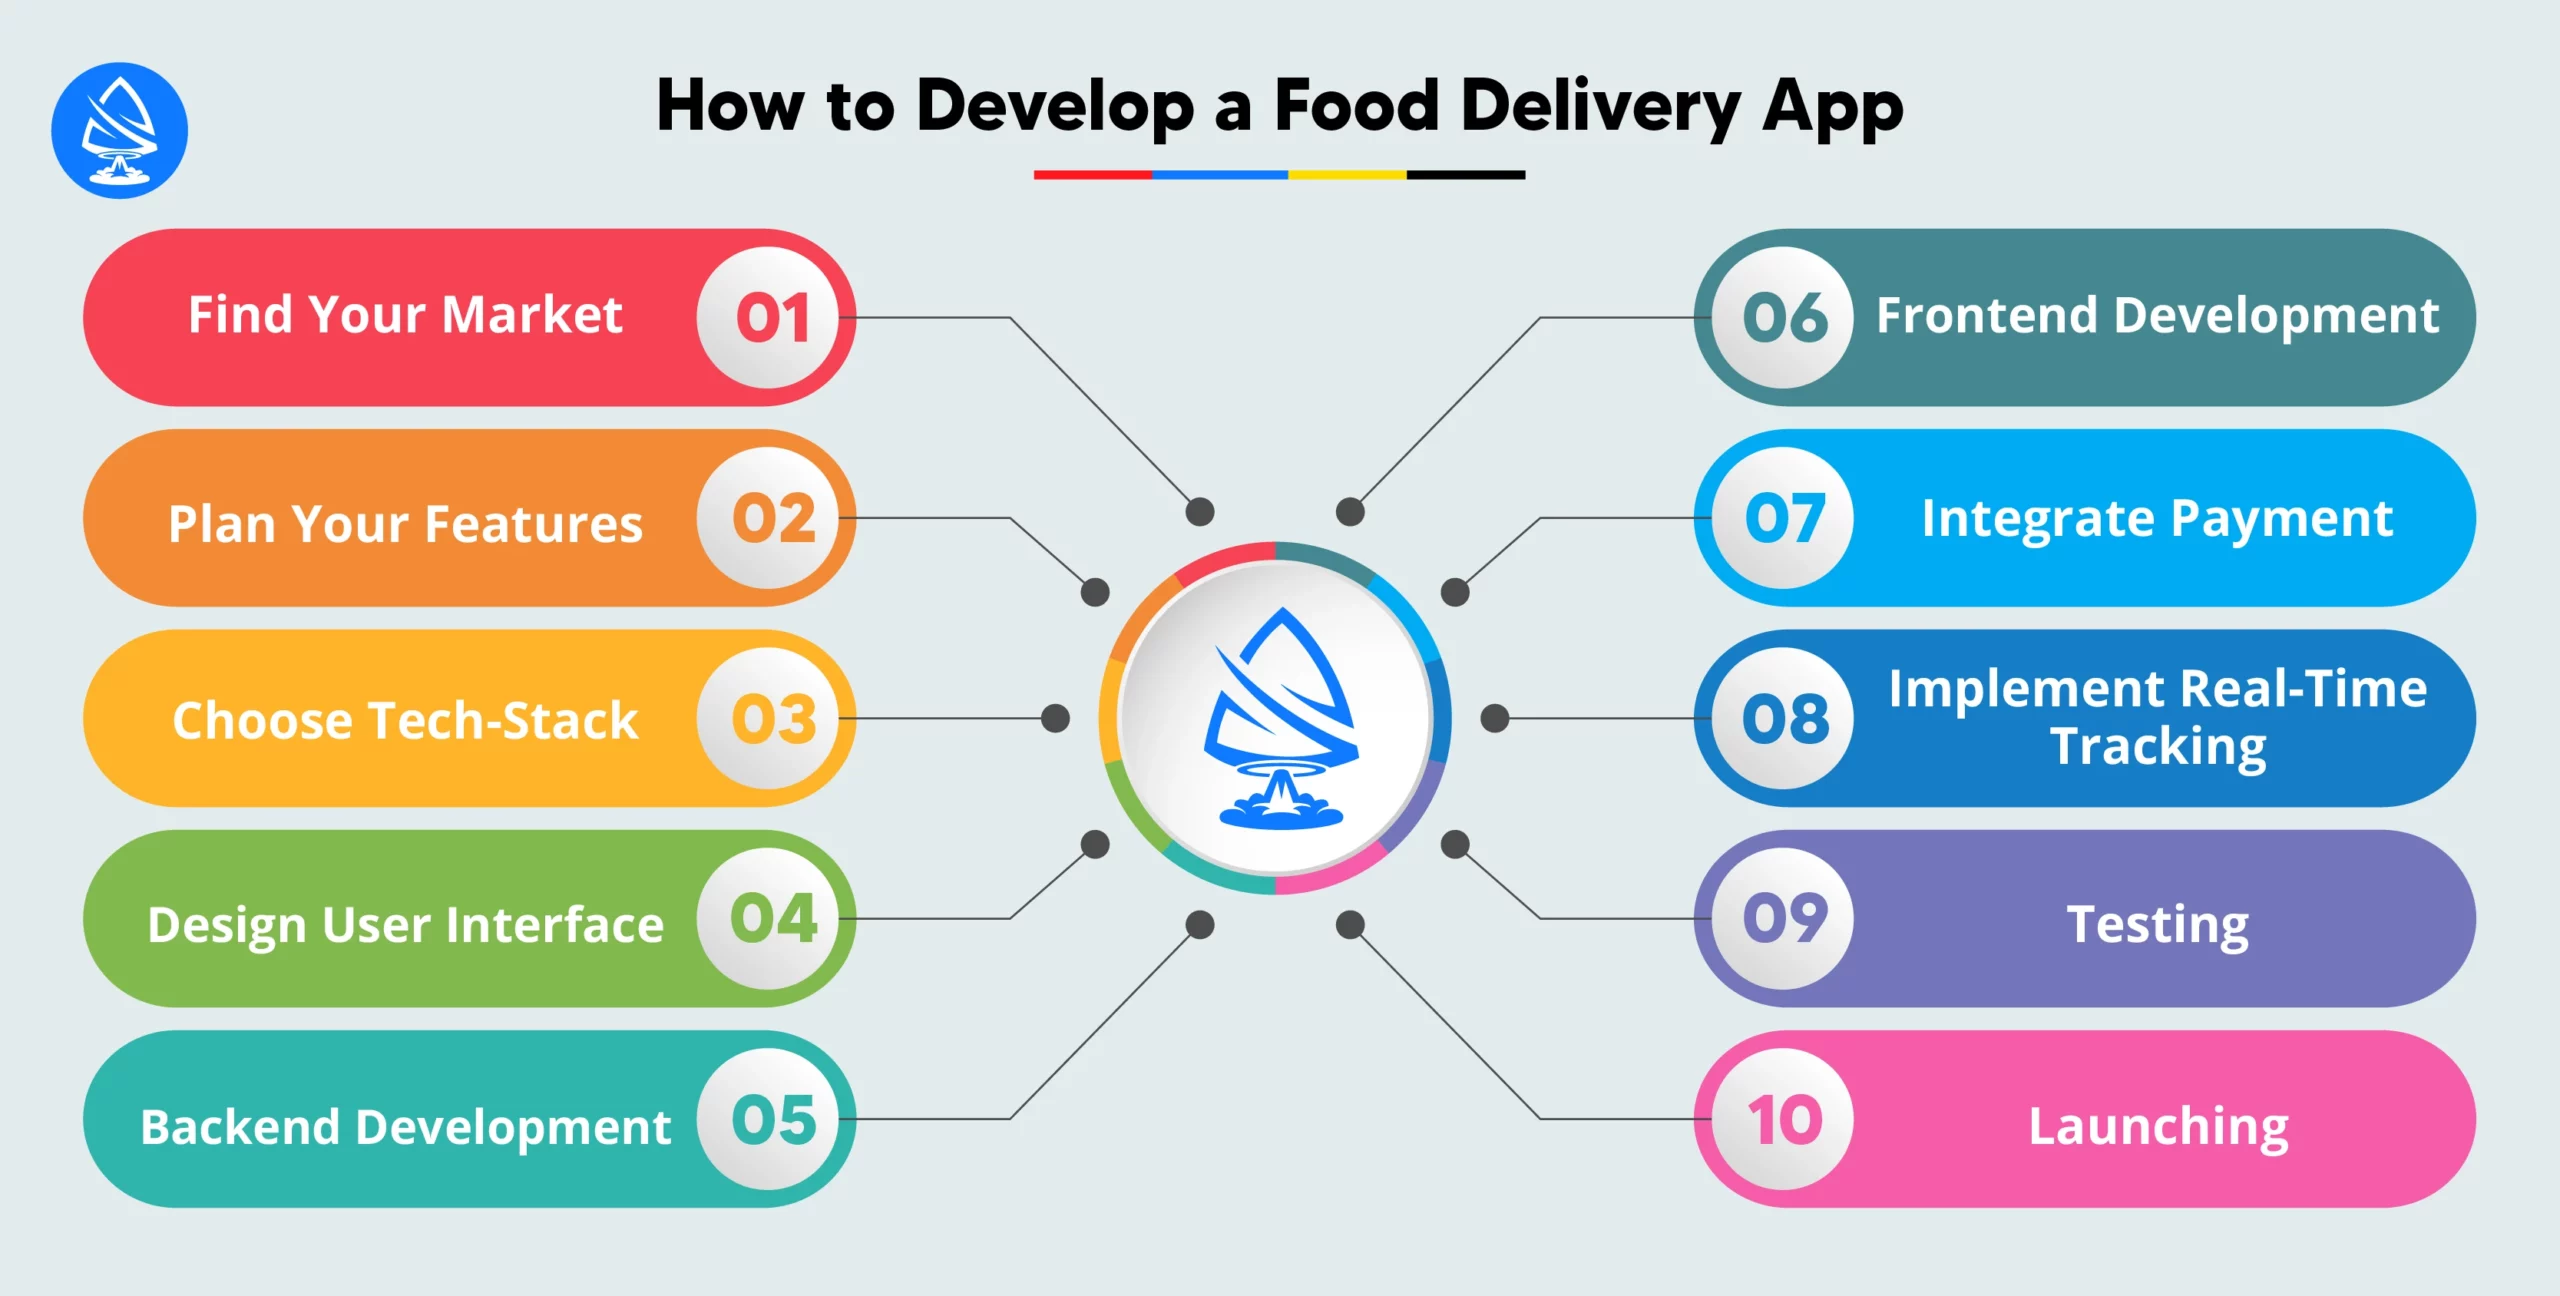 How to Develop a Food Delivery App